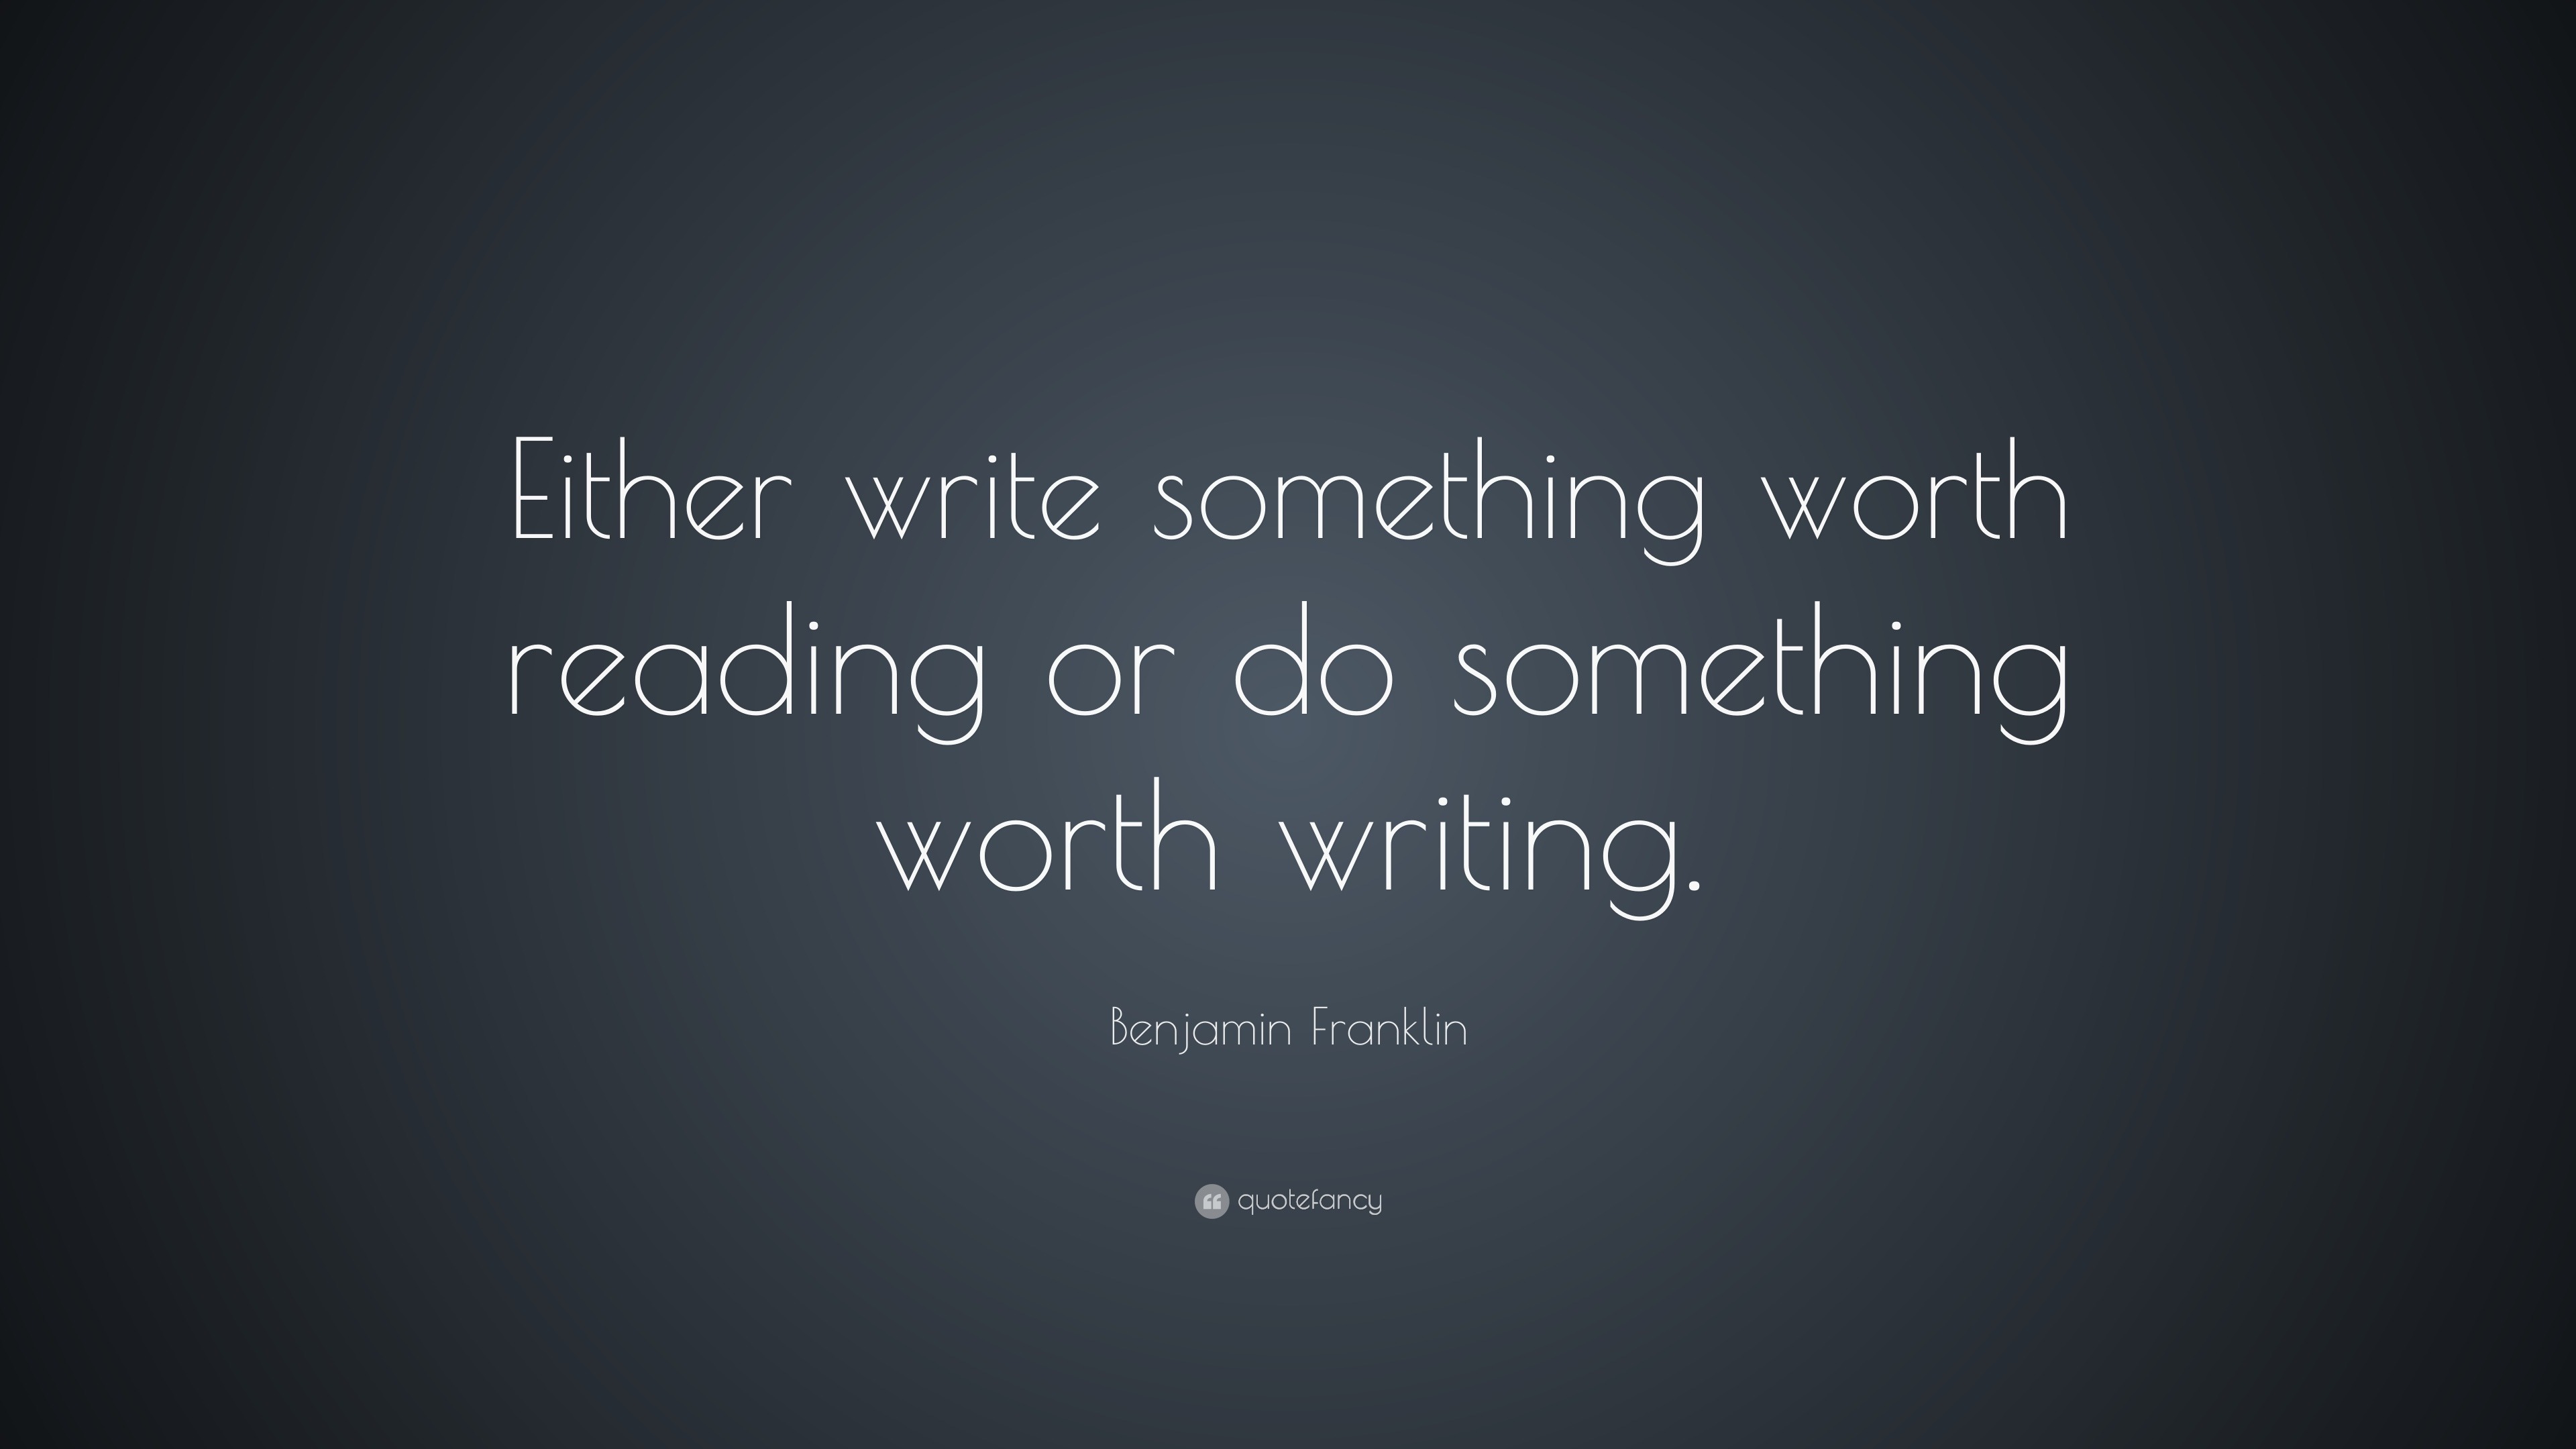 Either write something worth reading or do something worth writing about.